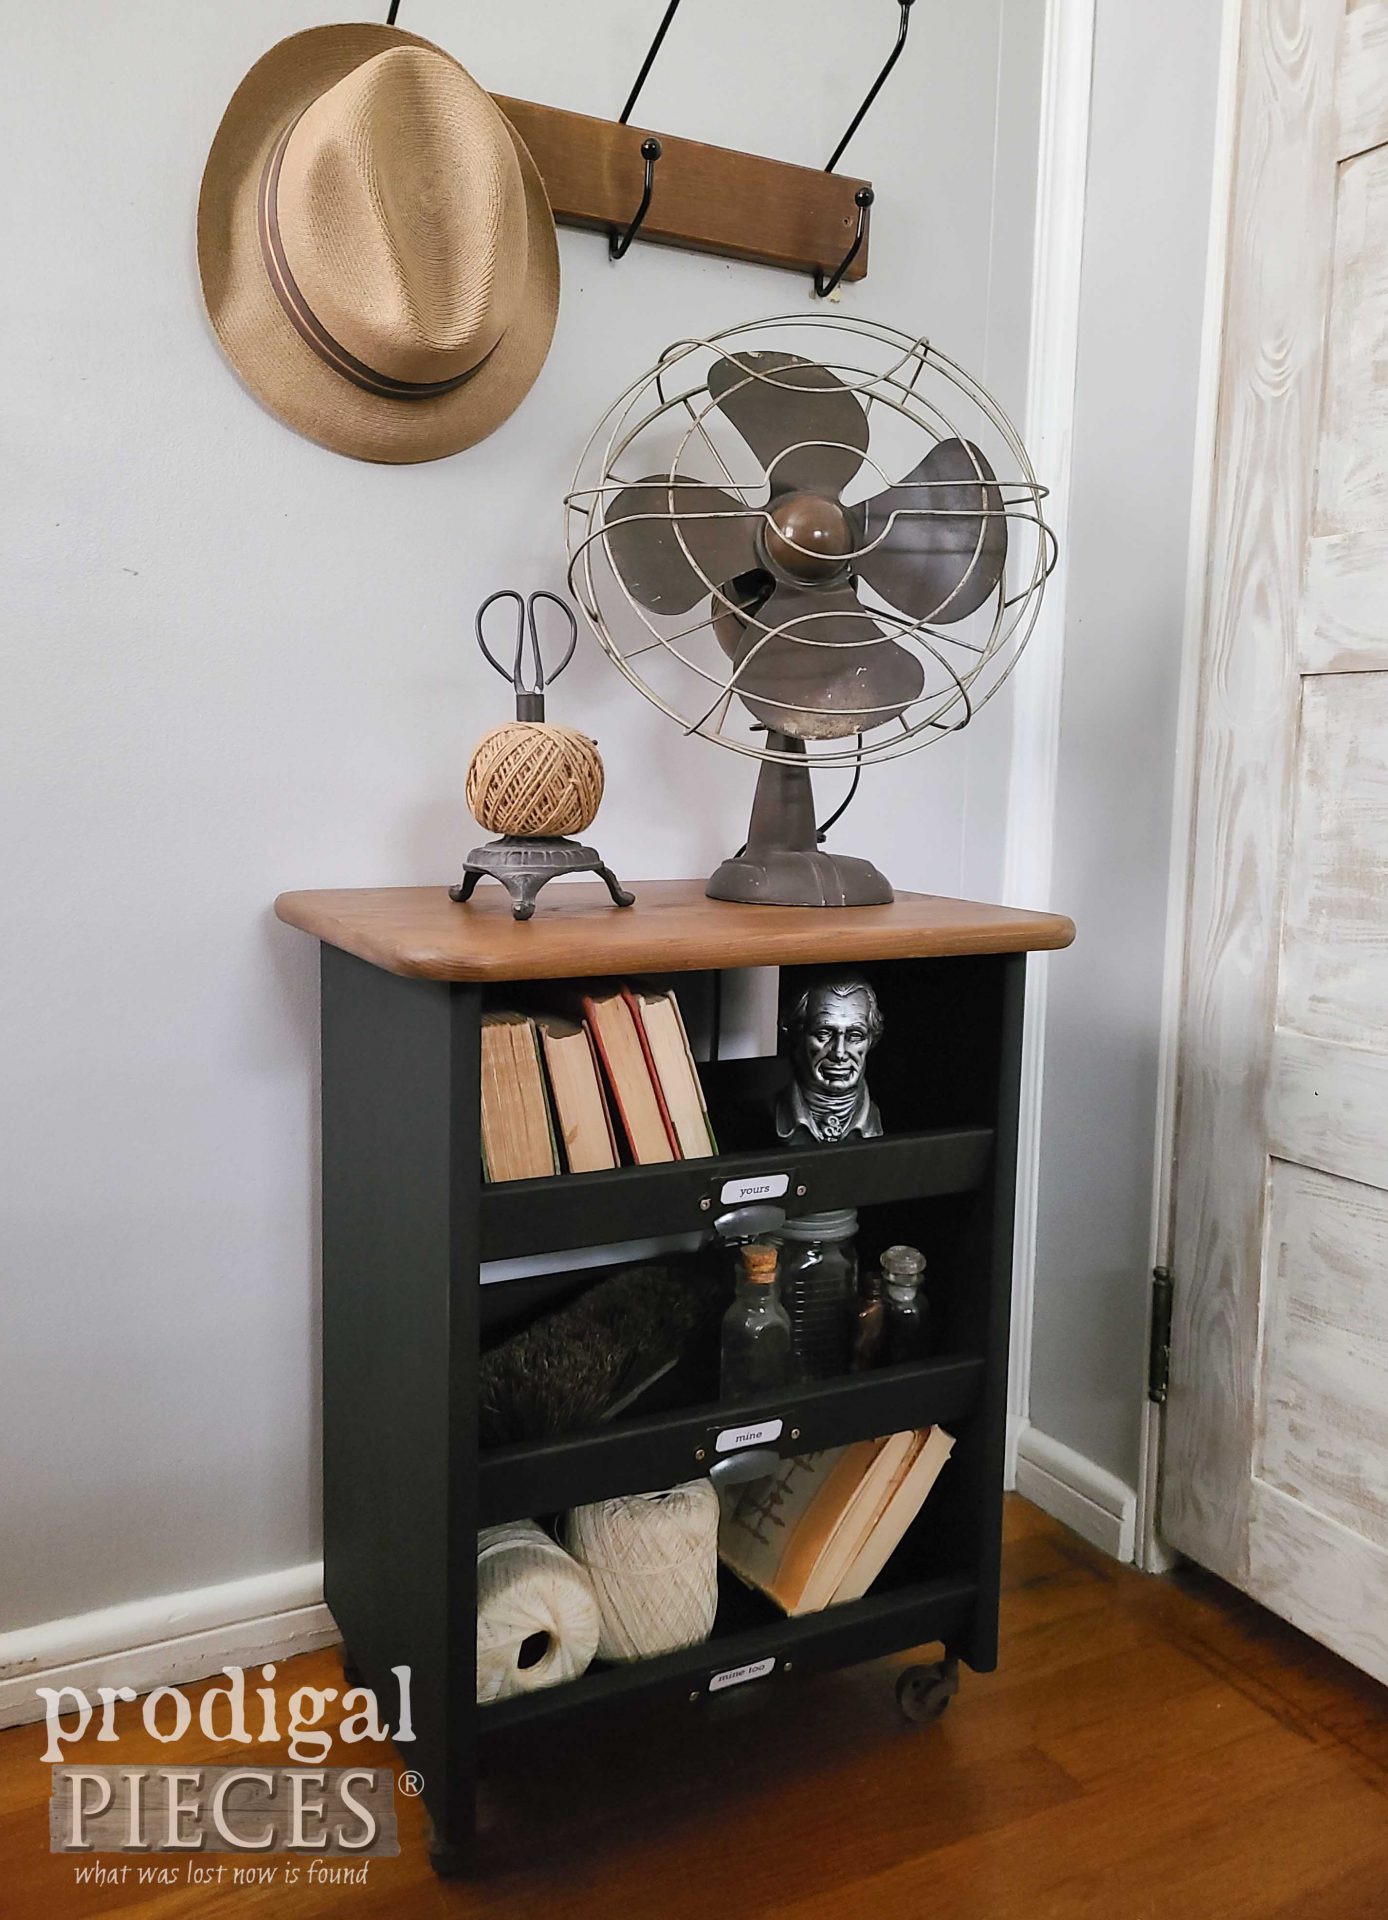 Black Industrial Style Wooden Rolling Cart by Larissa of Prodigal Pieces | prodigalpieces.com #prodigalpieces #farmhouse #industrial #diy